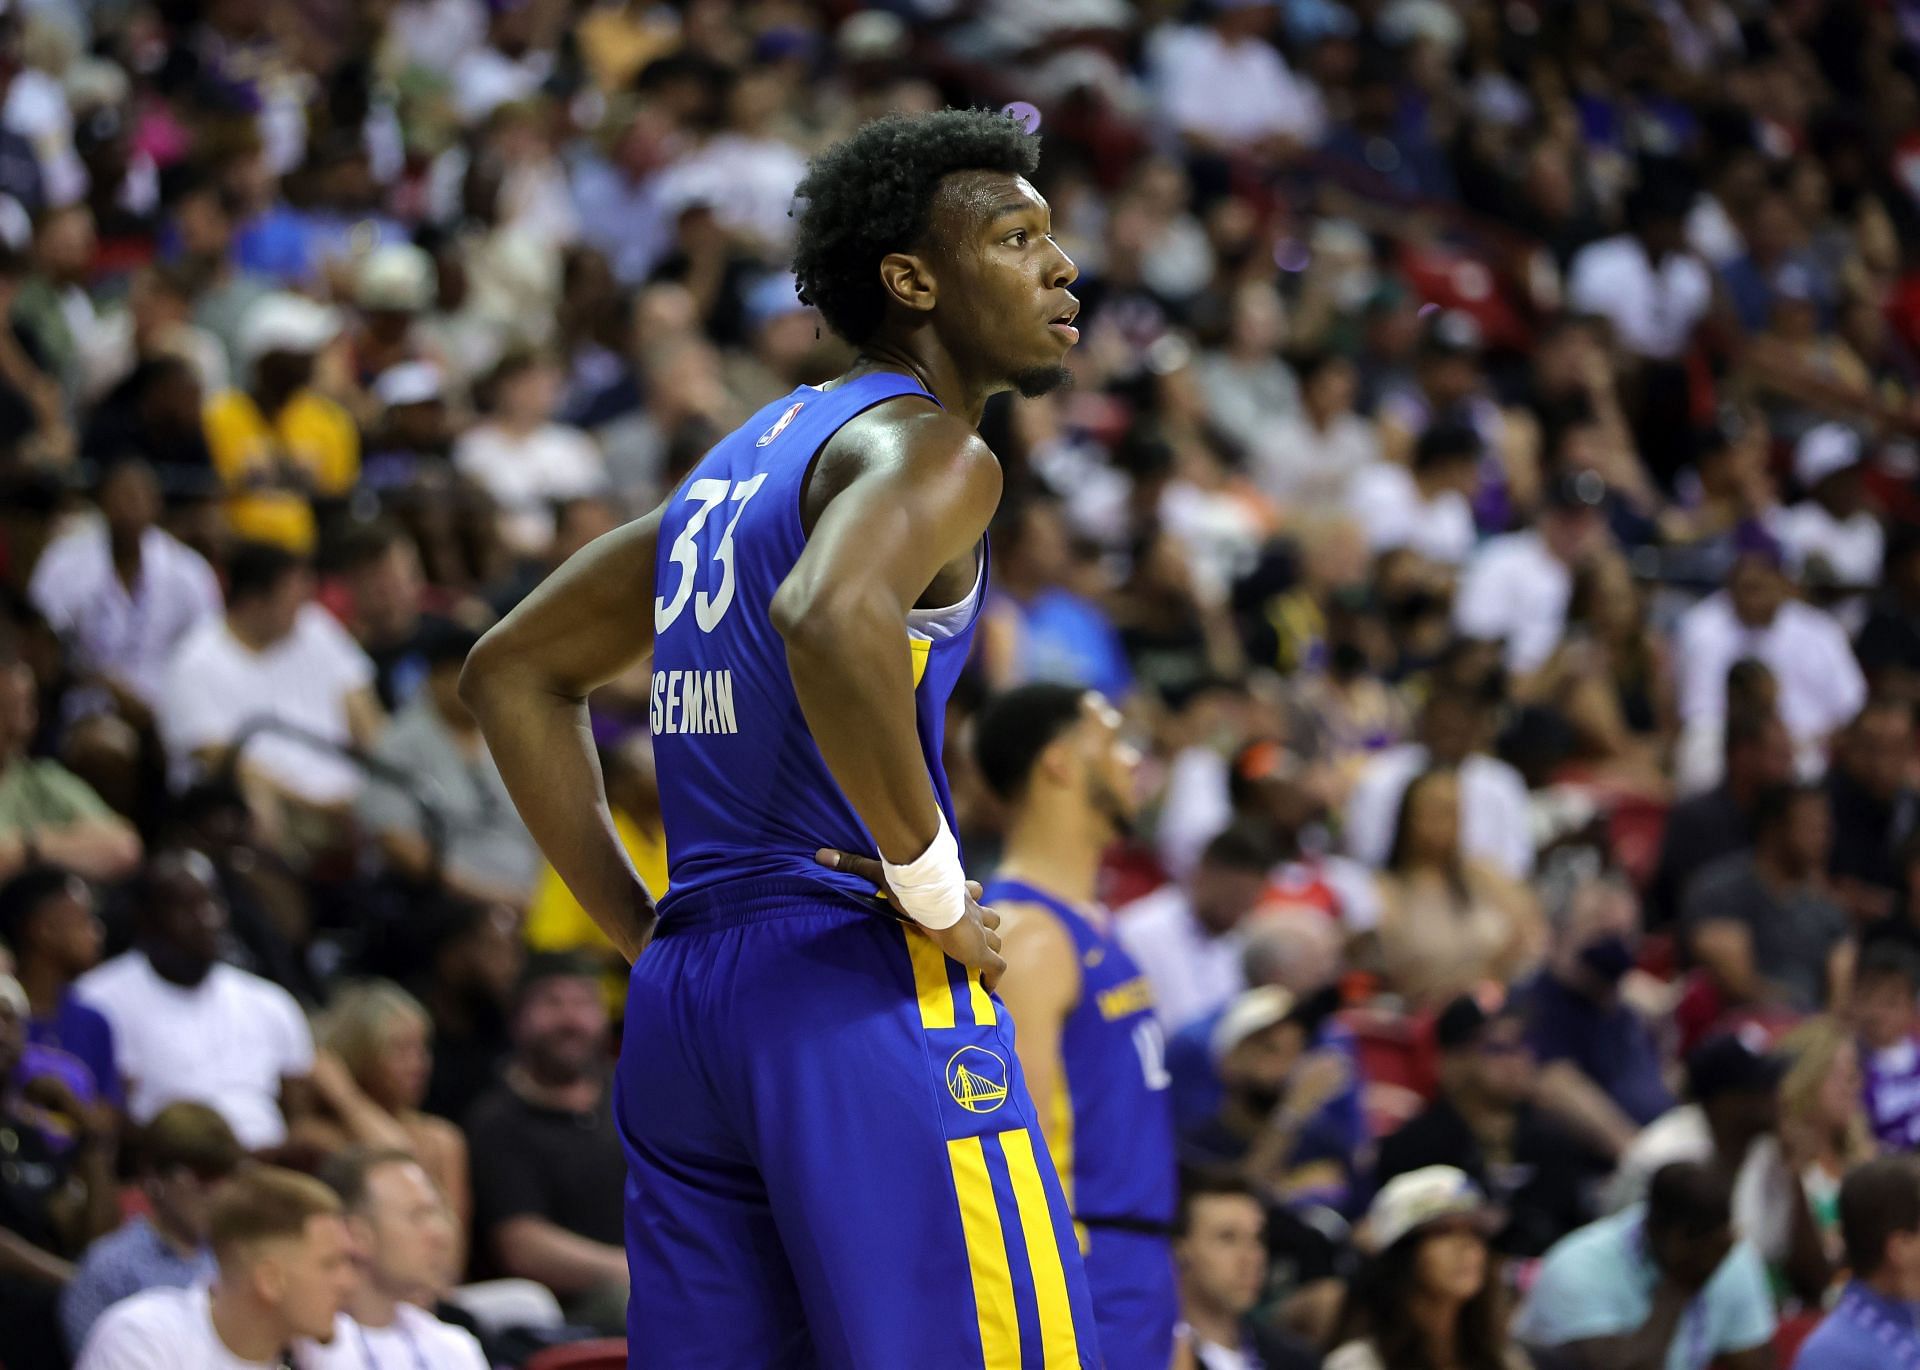 James Wiseman of the Golden State Warriors in the 2022 NBA 2K23 Summer League